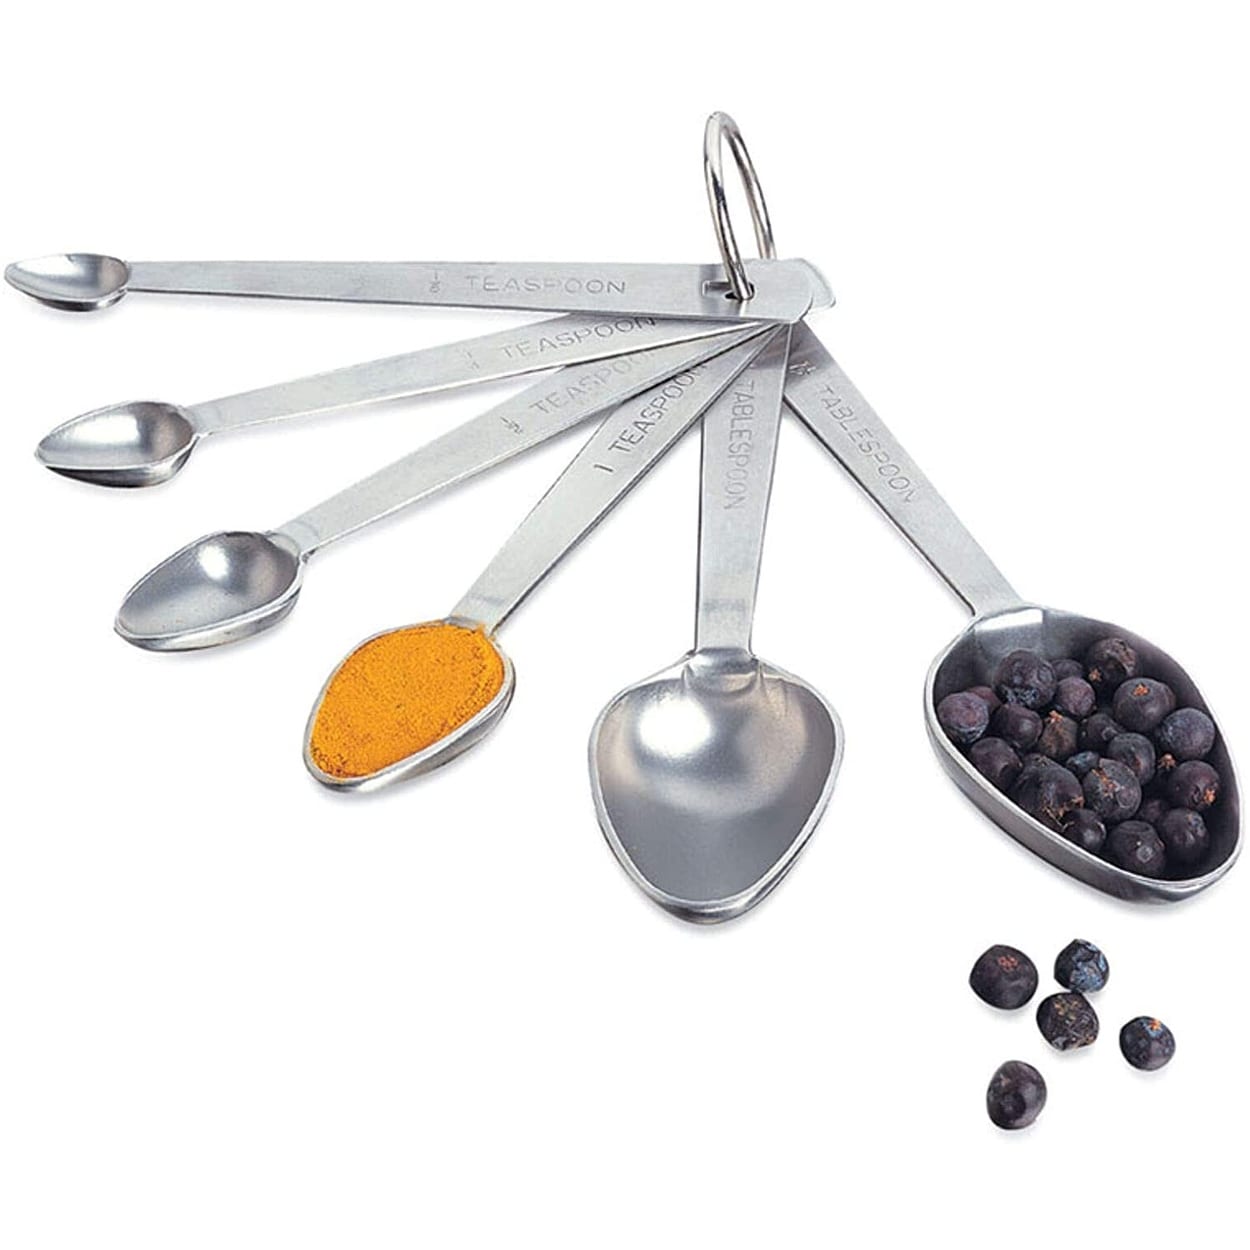 Basic Ingredients by Amco Stainless Steel China Set of 3 Measuring